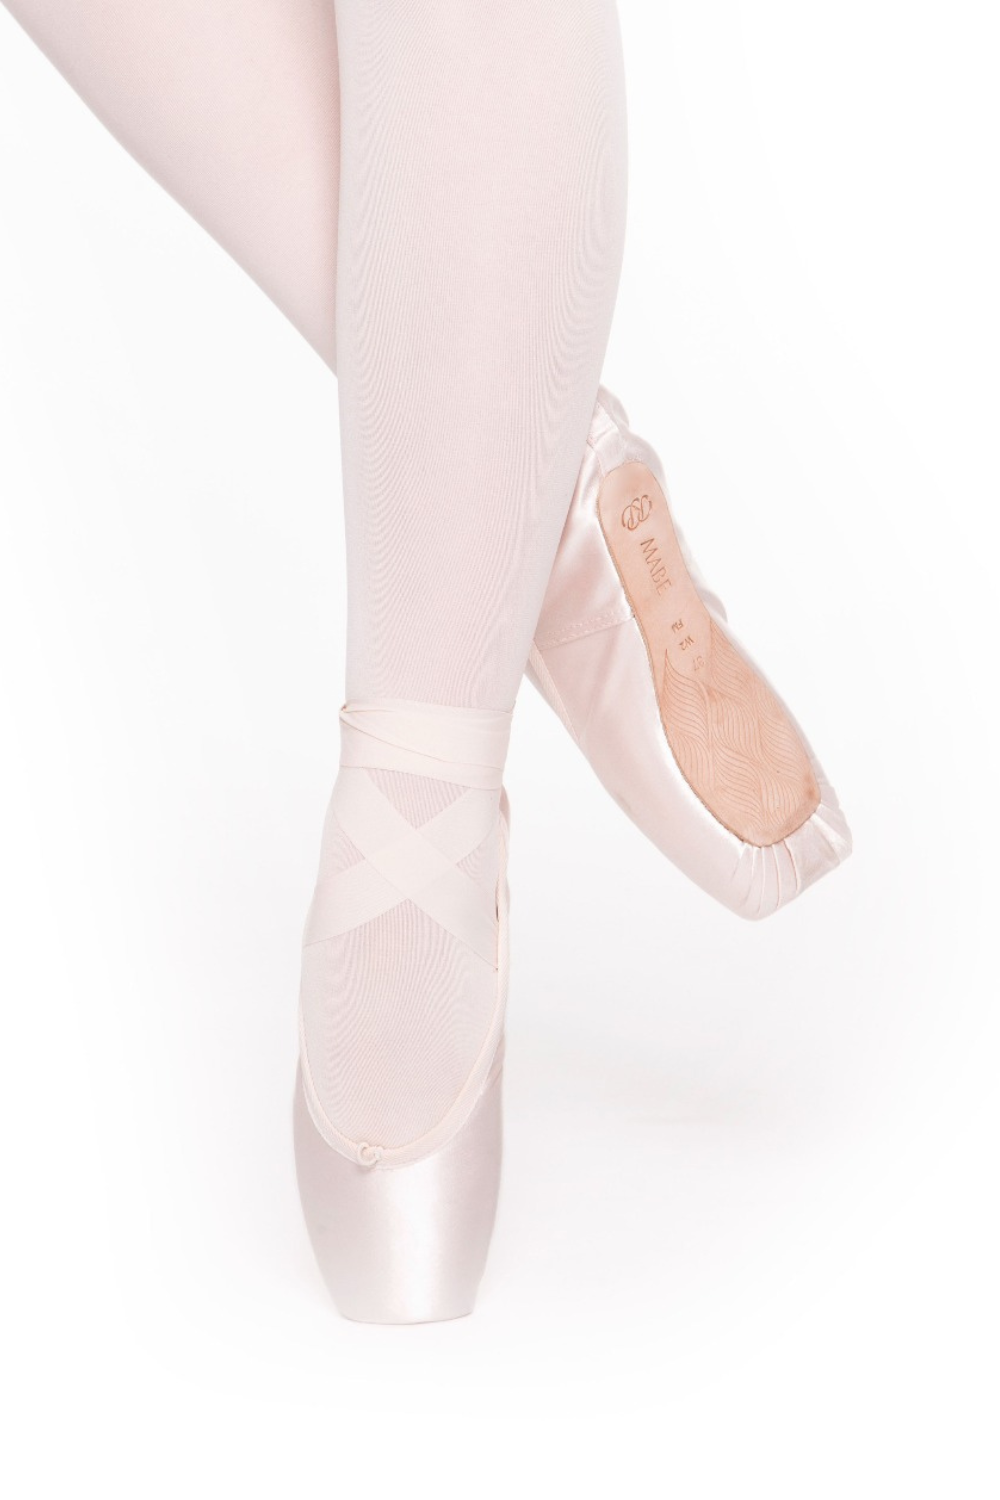 RUSSIAN POINTE MABE U-CUT WITH DRAWSTRING VAMP 2 SHANK FS POINTE SHOES